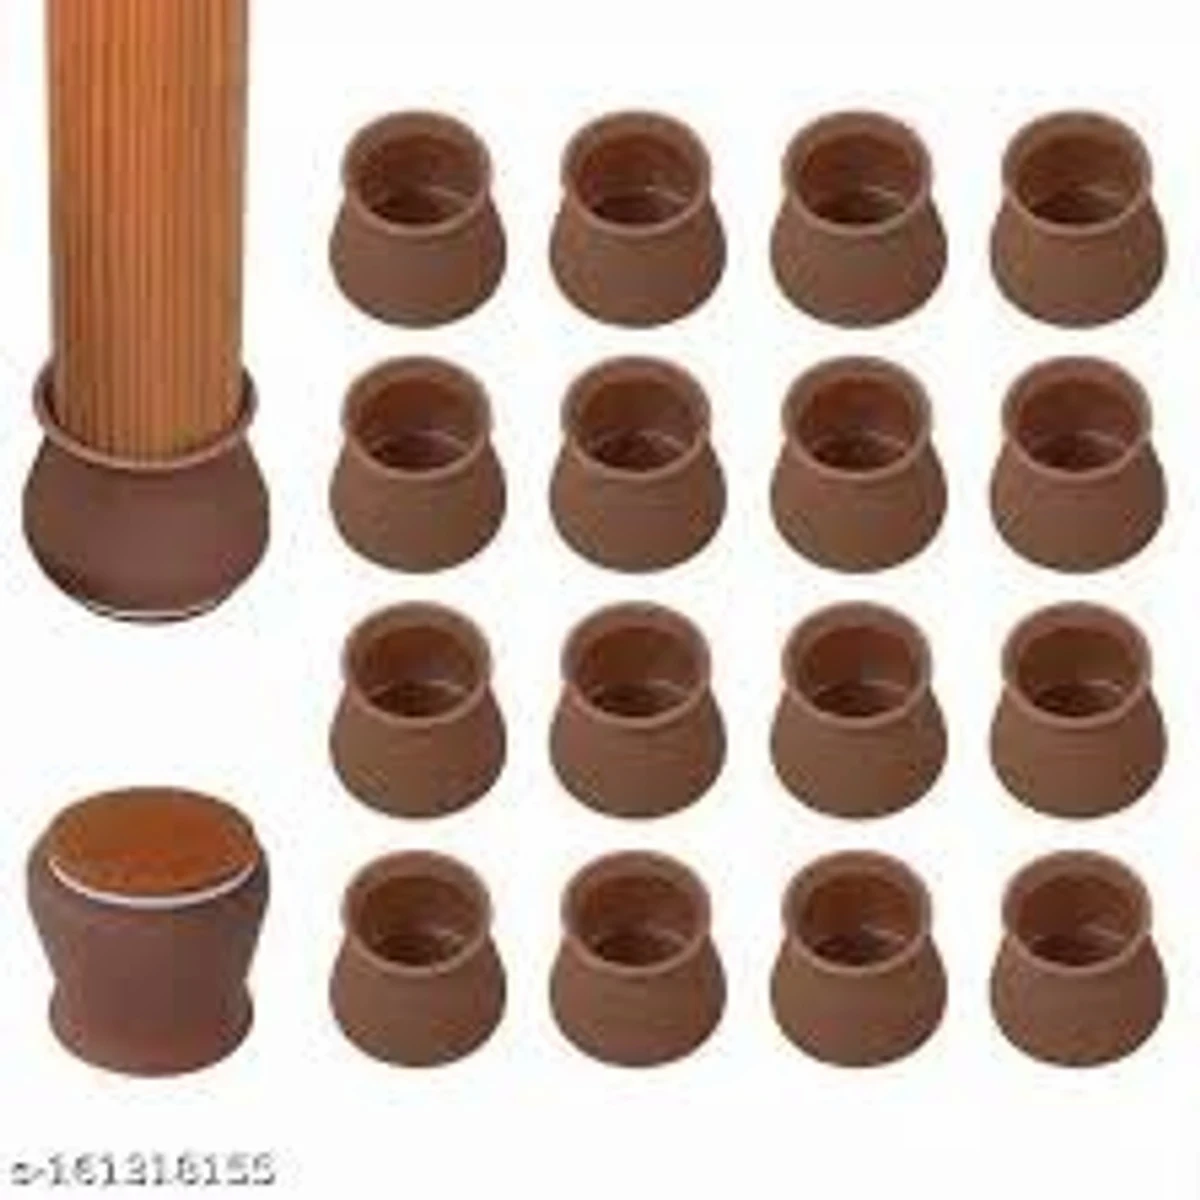 24 pcs Chair Leg Floor Protectors Felt Bottom Furniture Silicone Leg Caps, Chair Leg Covers to Reduce Noise, Easily Moving for Furniture Chair Feet,(coffee colour)